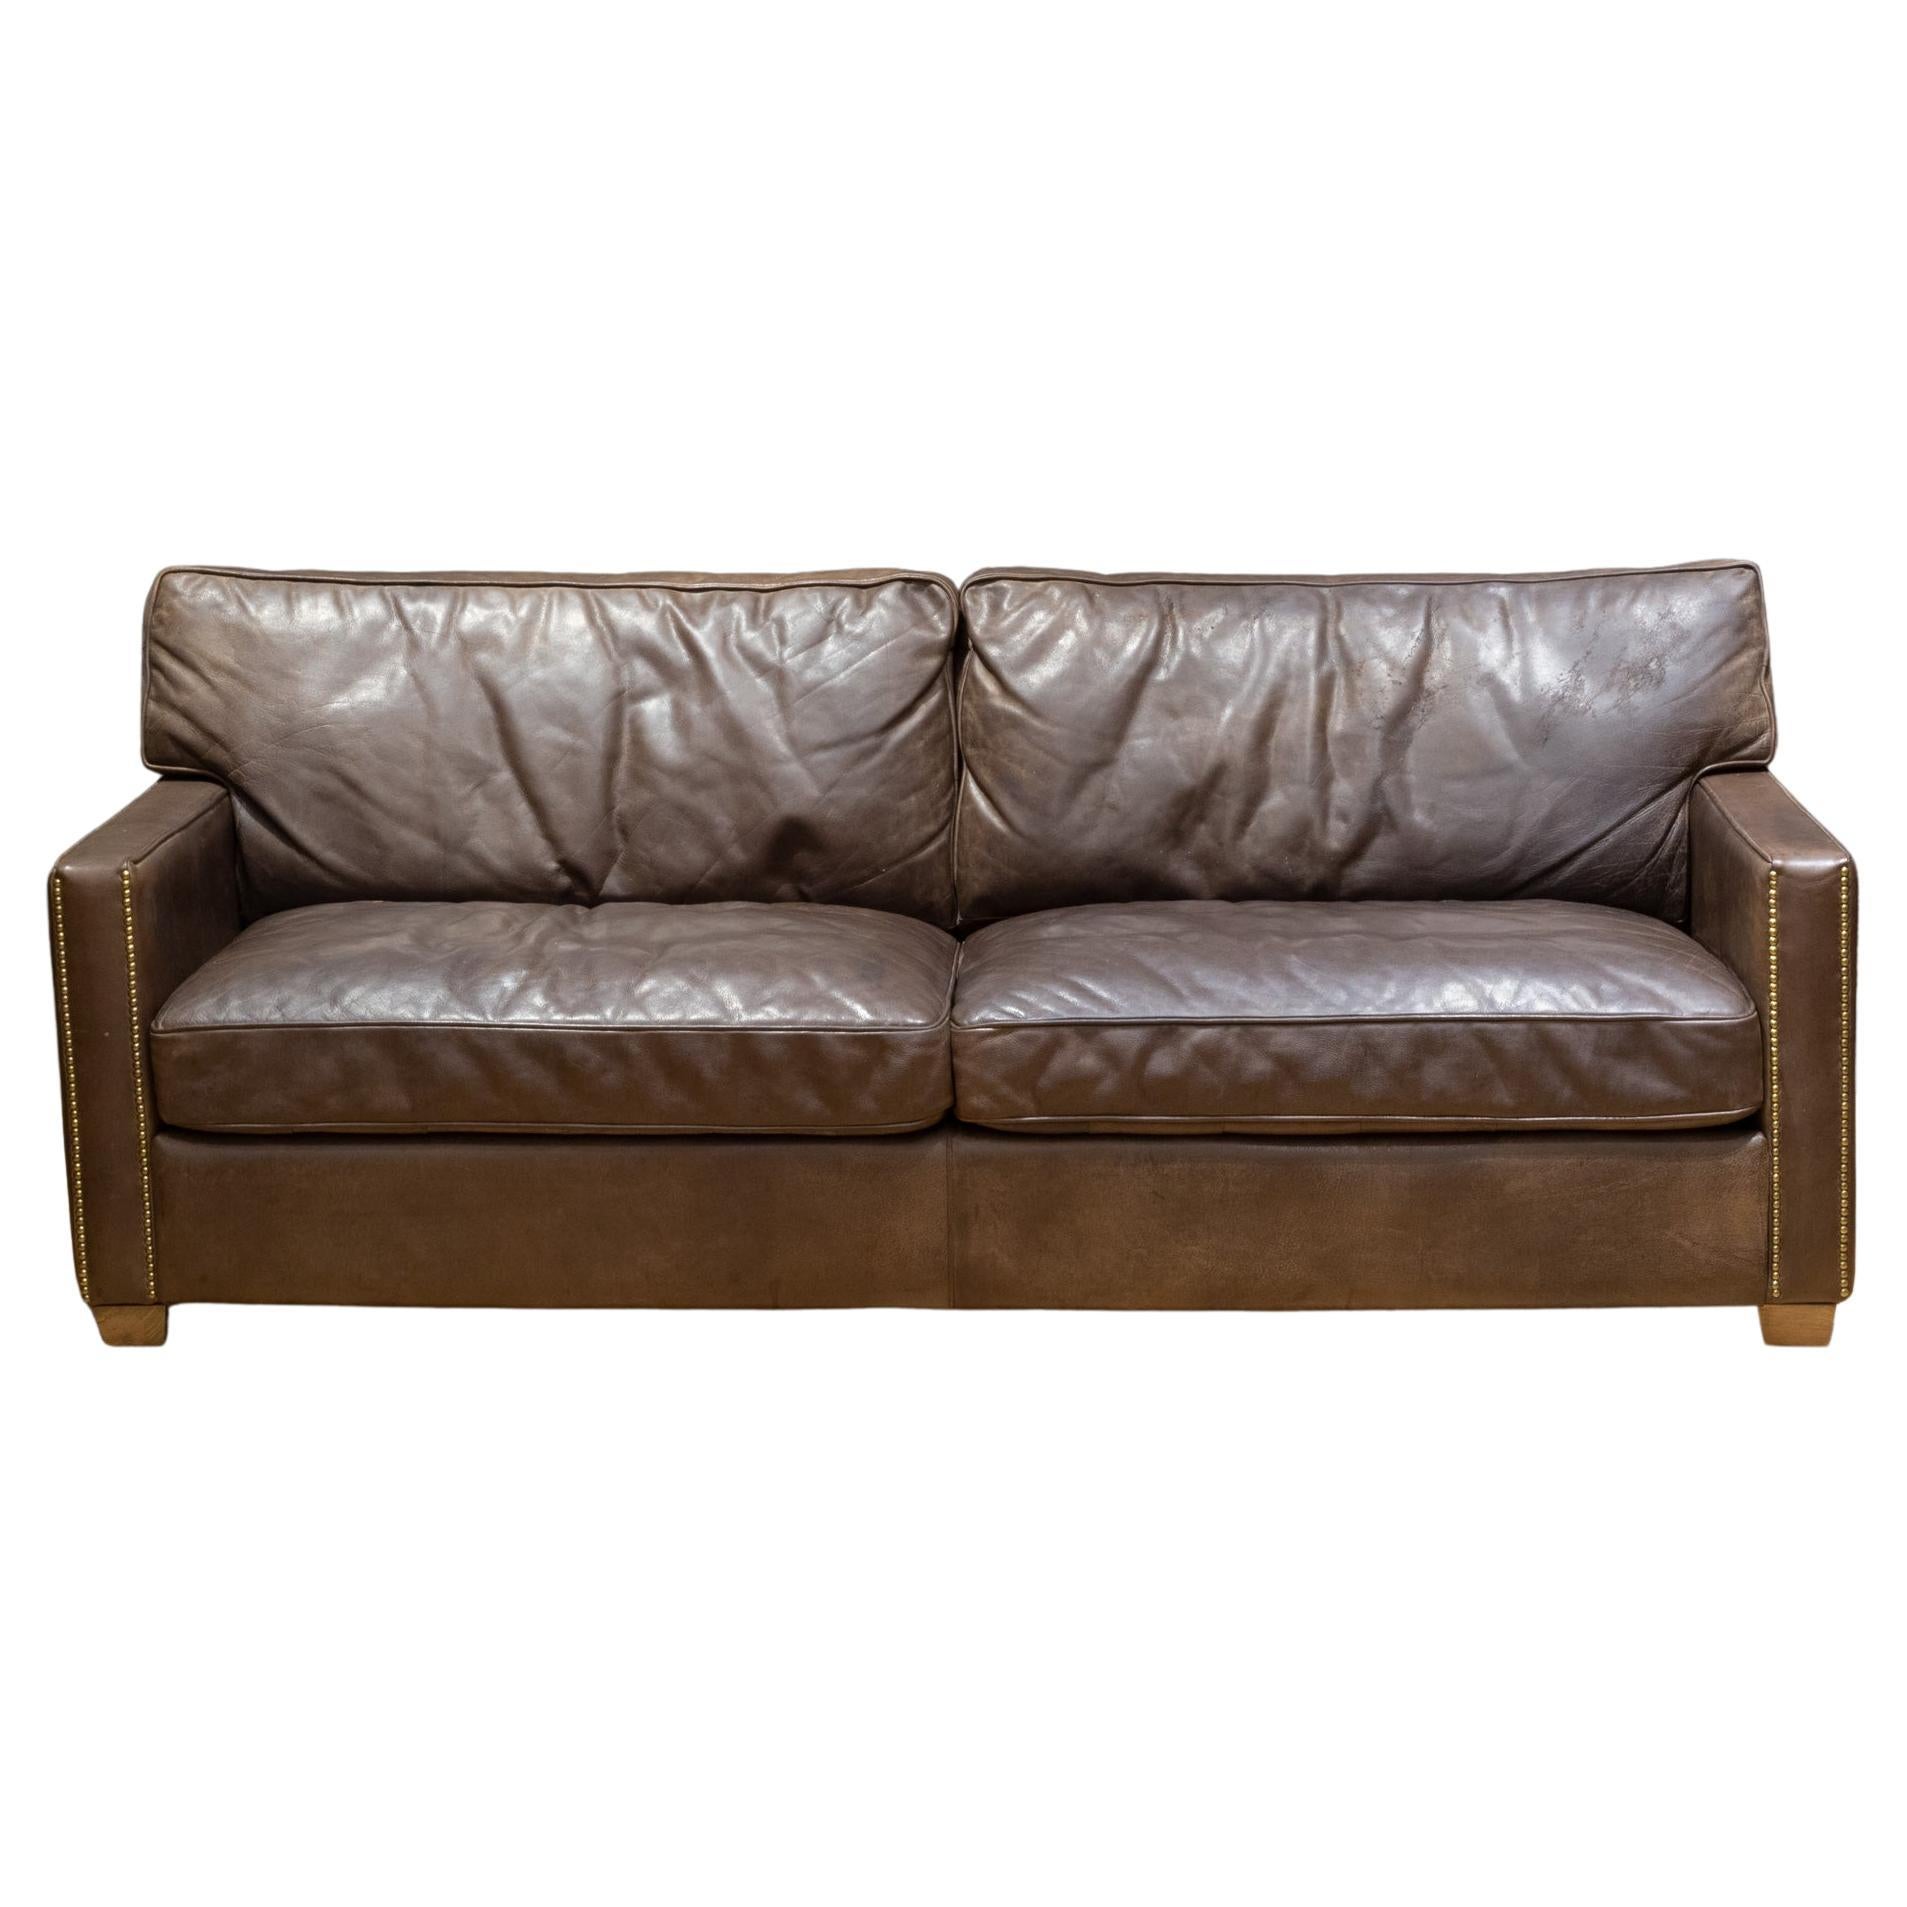 Timothy Oulton Viscount William Leather 3 Seater Sofa 